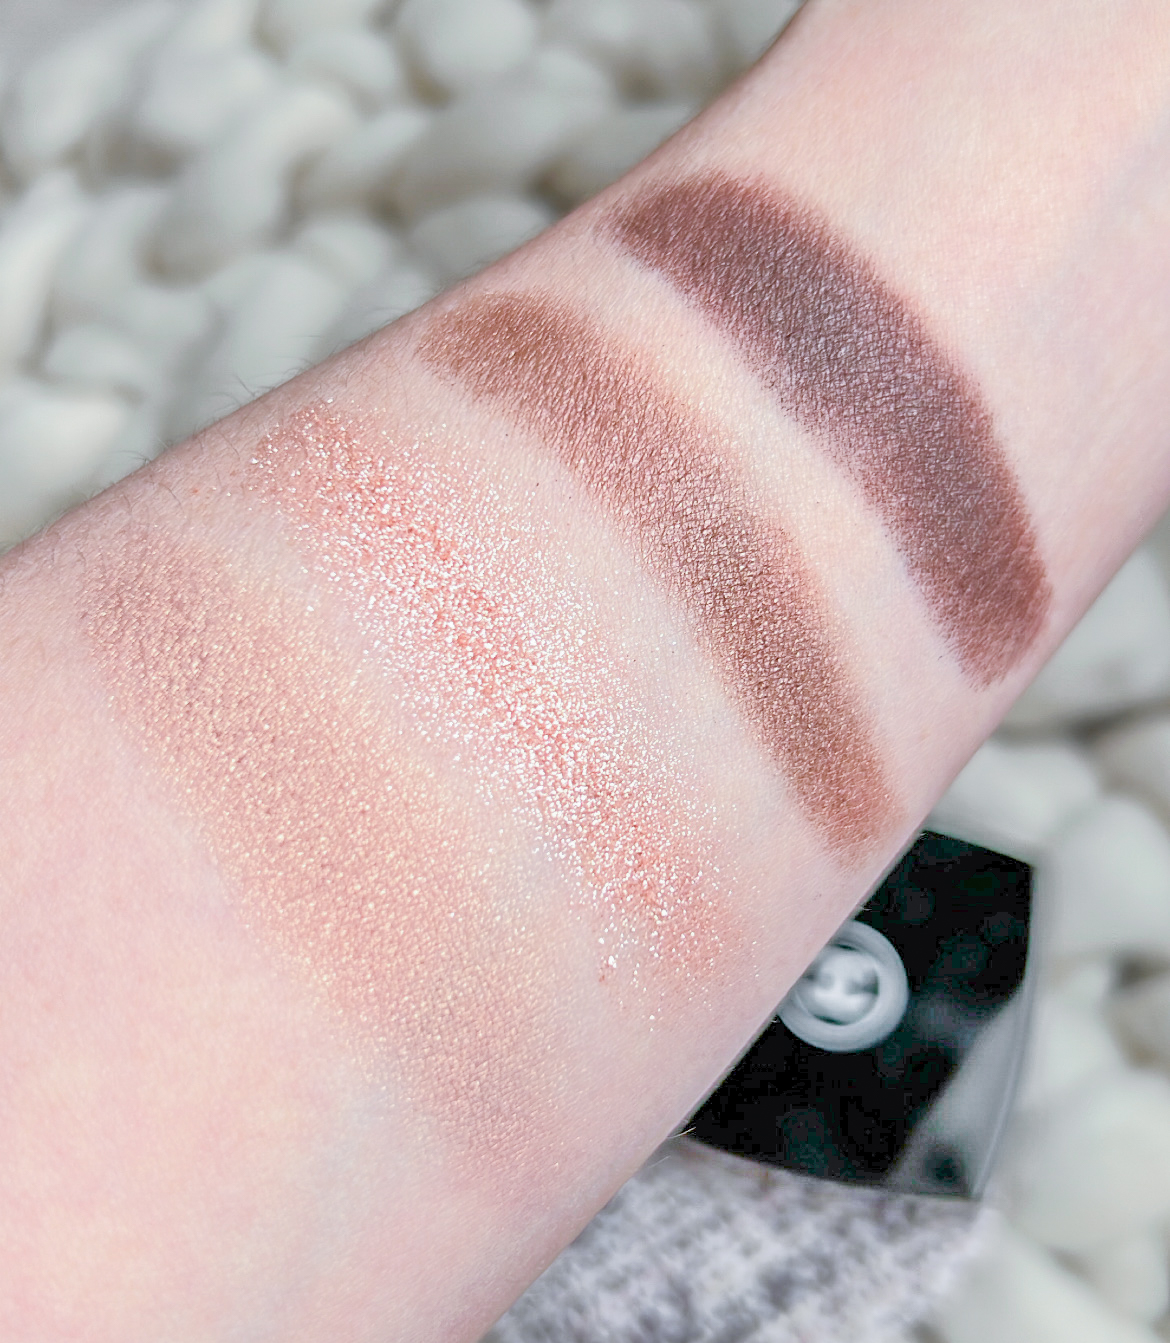 New: Chanel Les 4 Ombres Tweed Review + Swatches - alittlebitetc